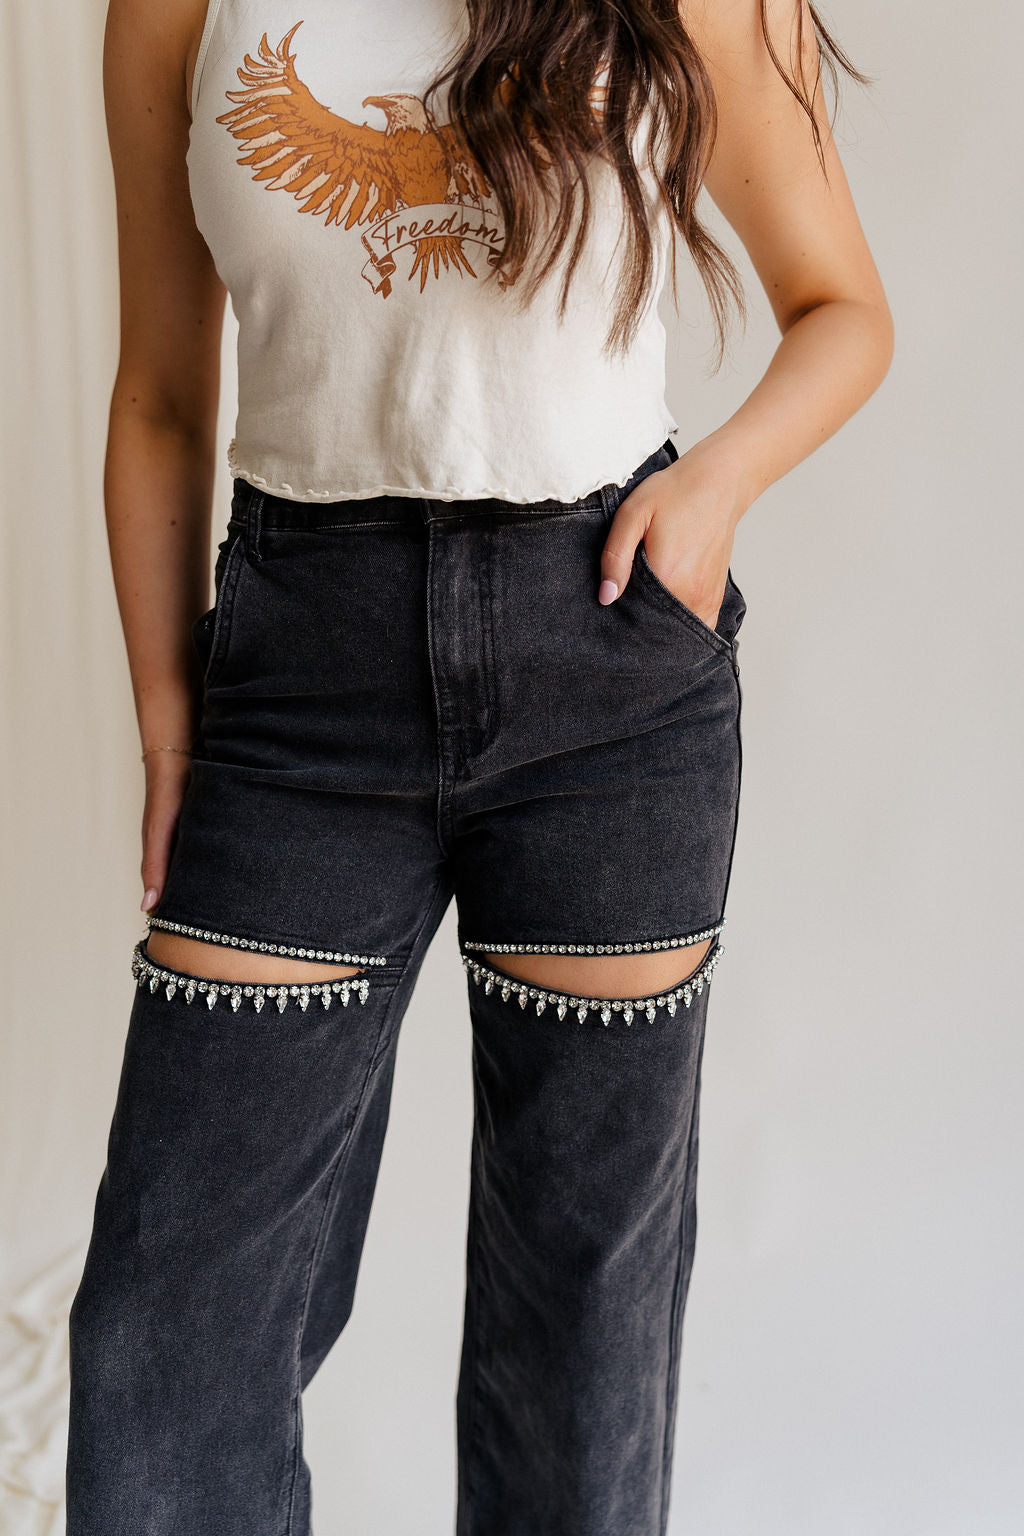 Close up front view of female model wearing the Remi Rhinestone Slit Black Jeans that have black denim, thigh slits with rhinestone trim, and pockets.